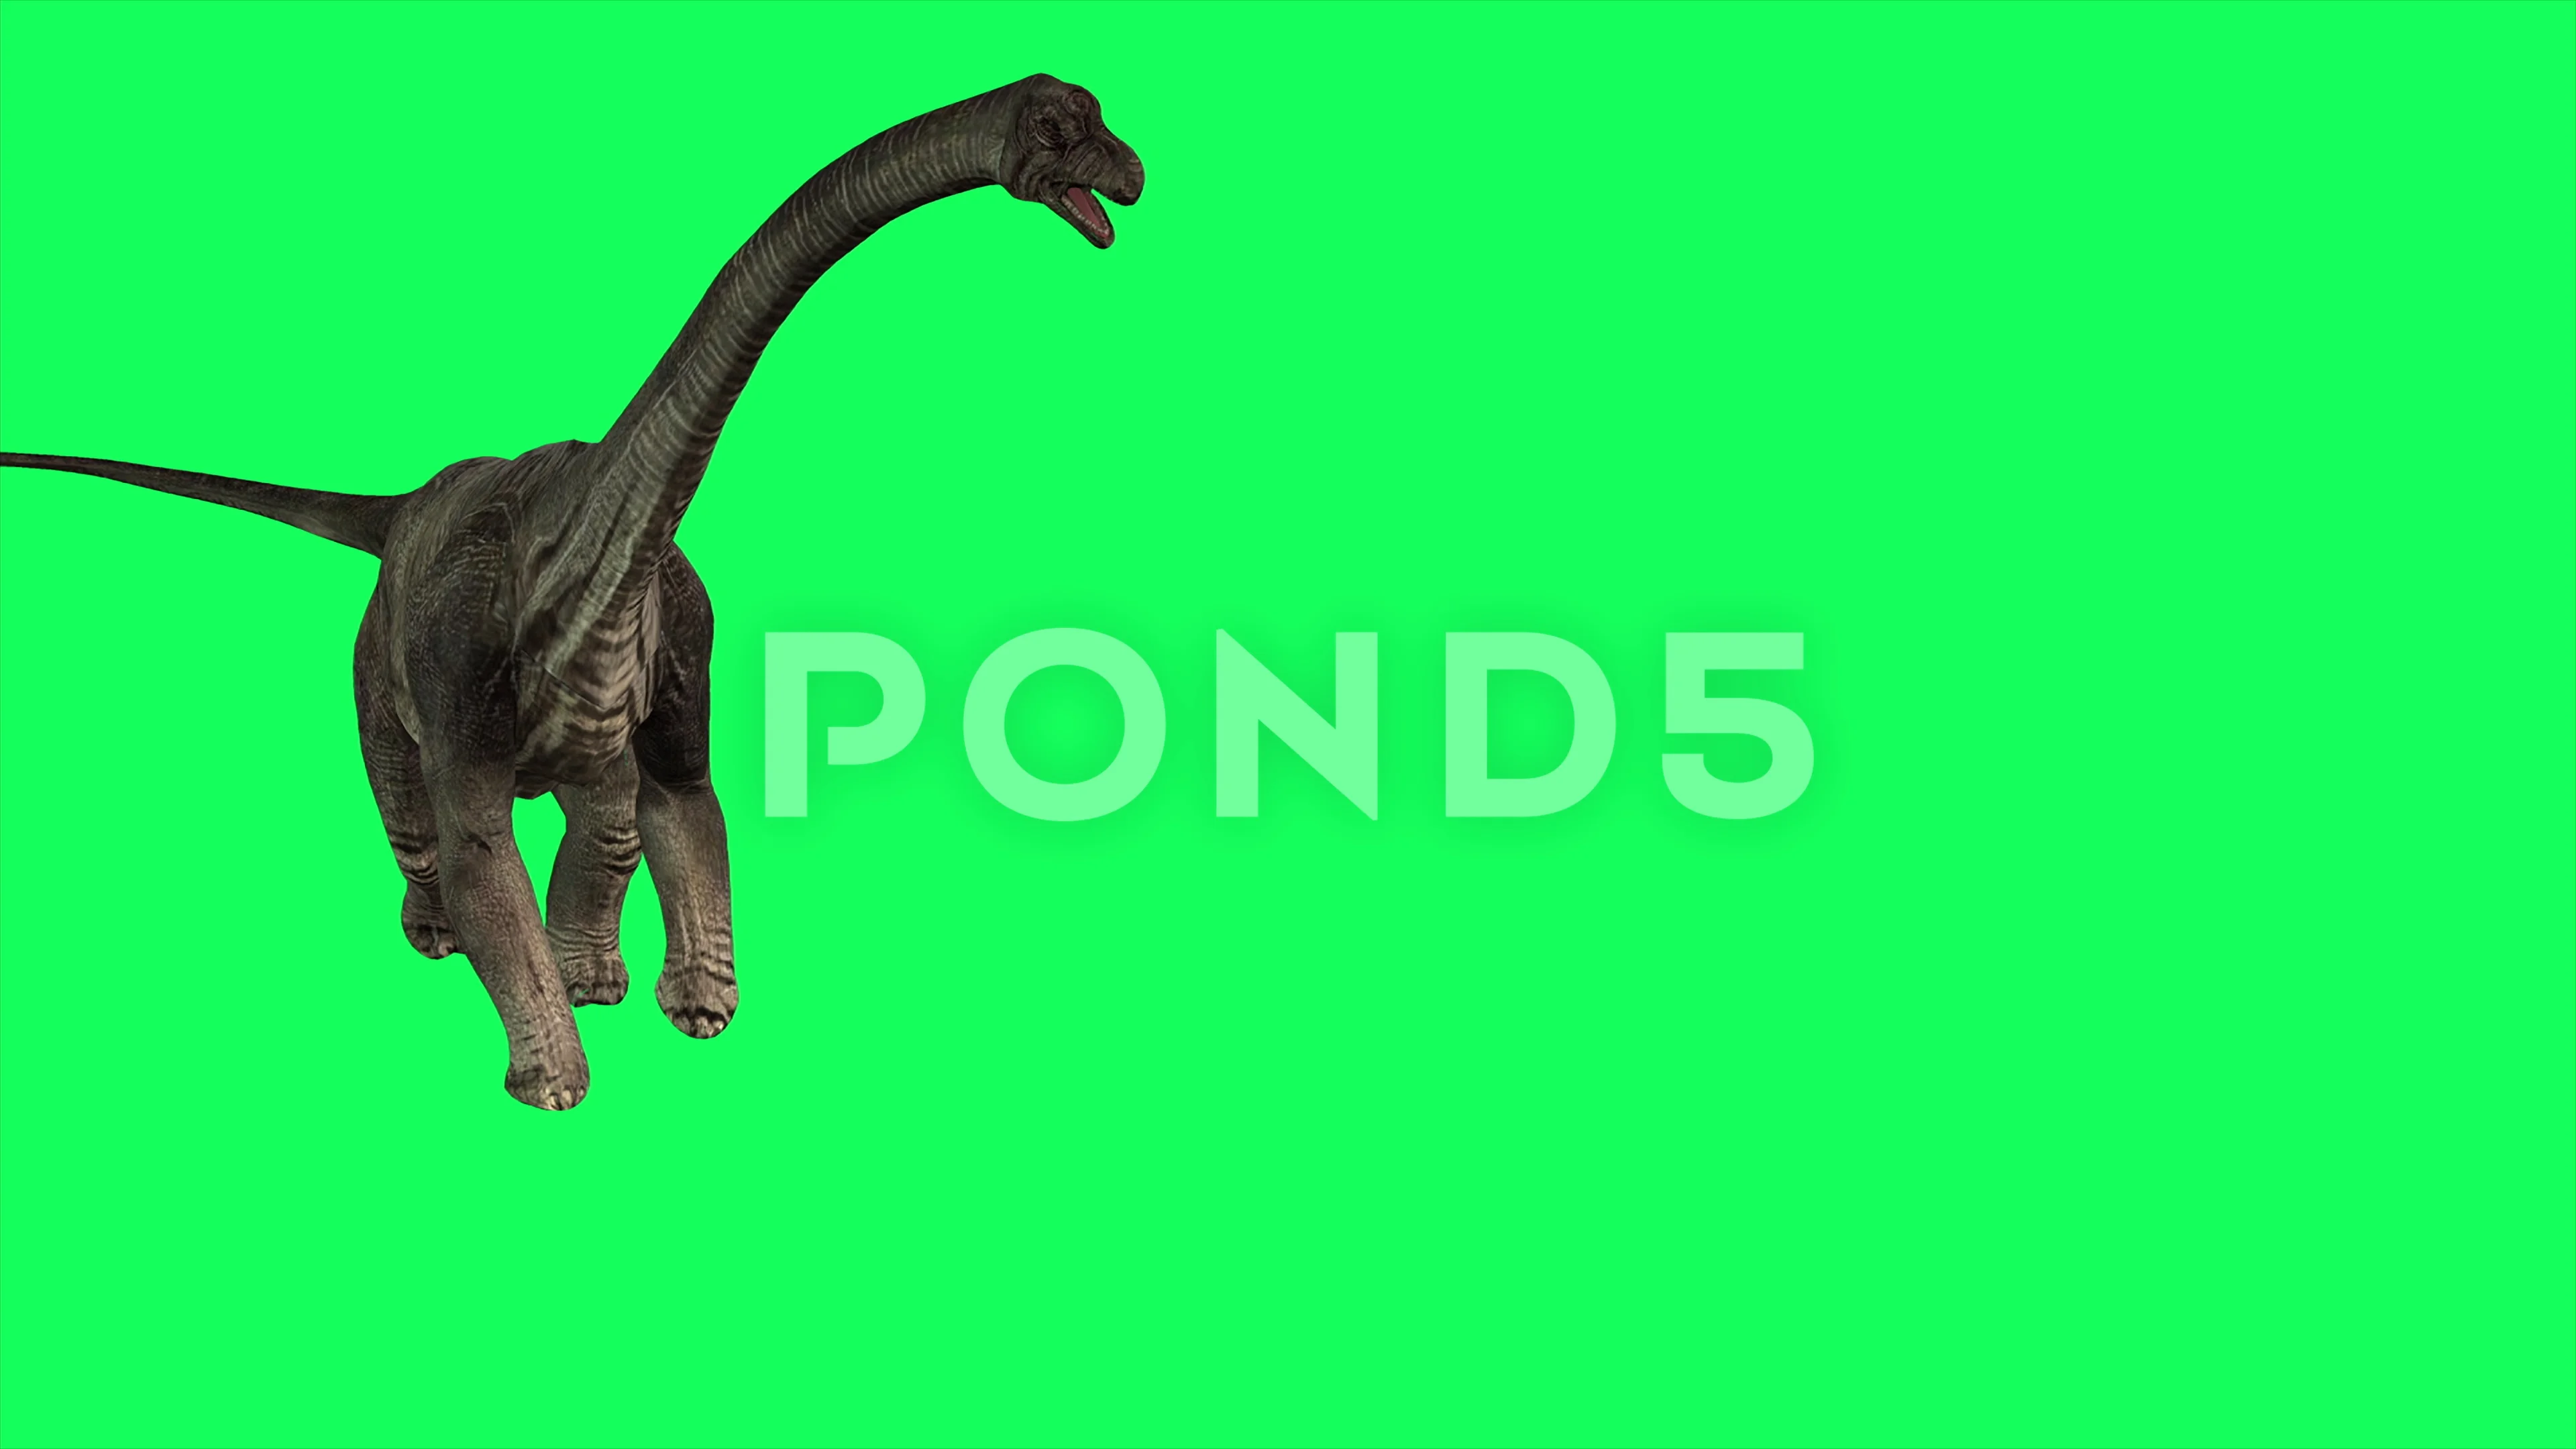 moving animations of dinosaurs